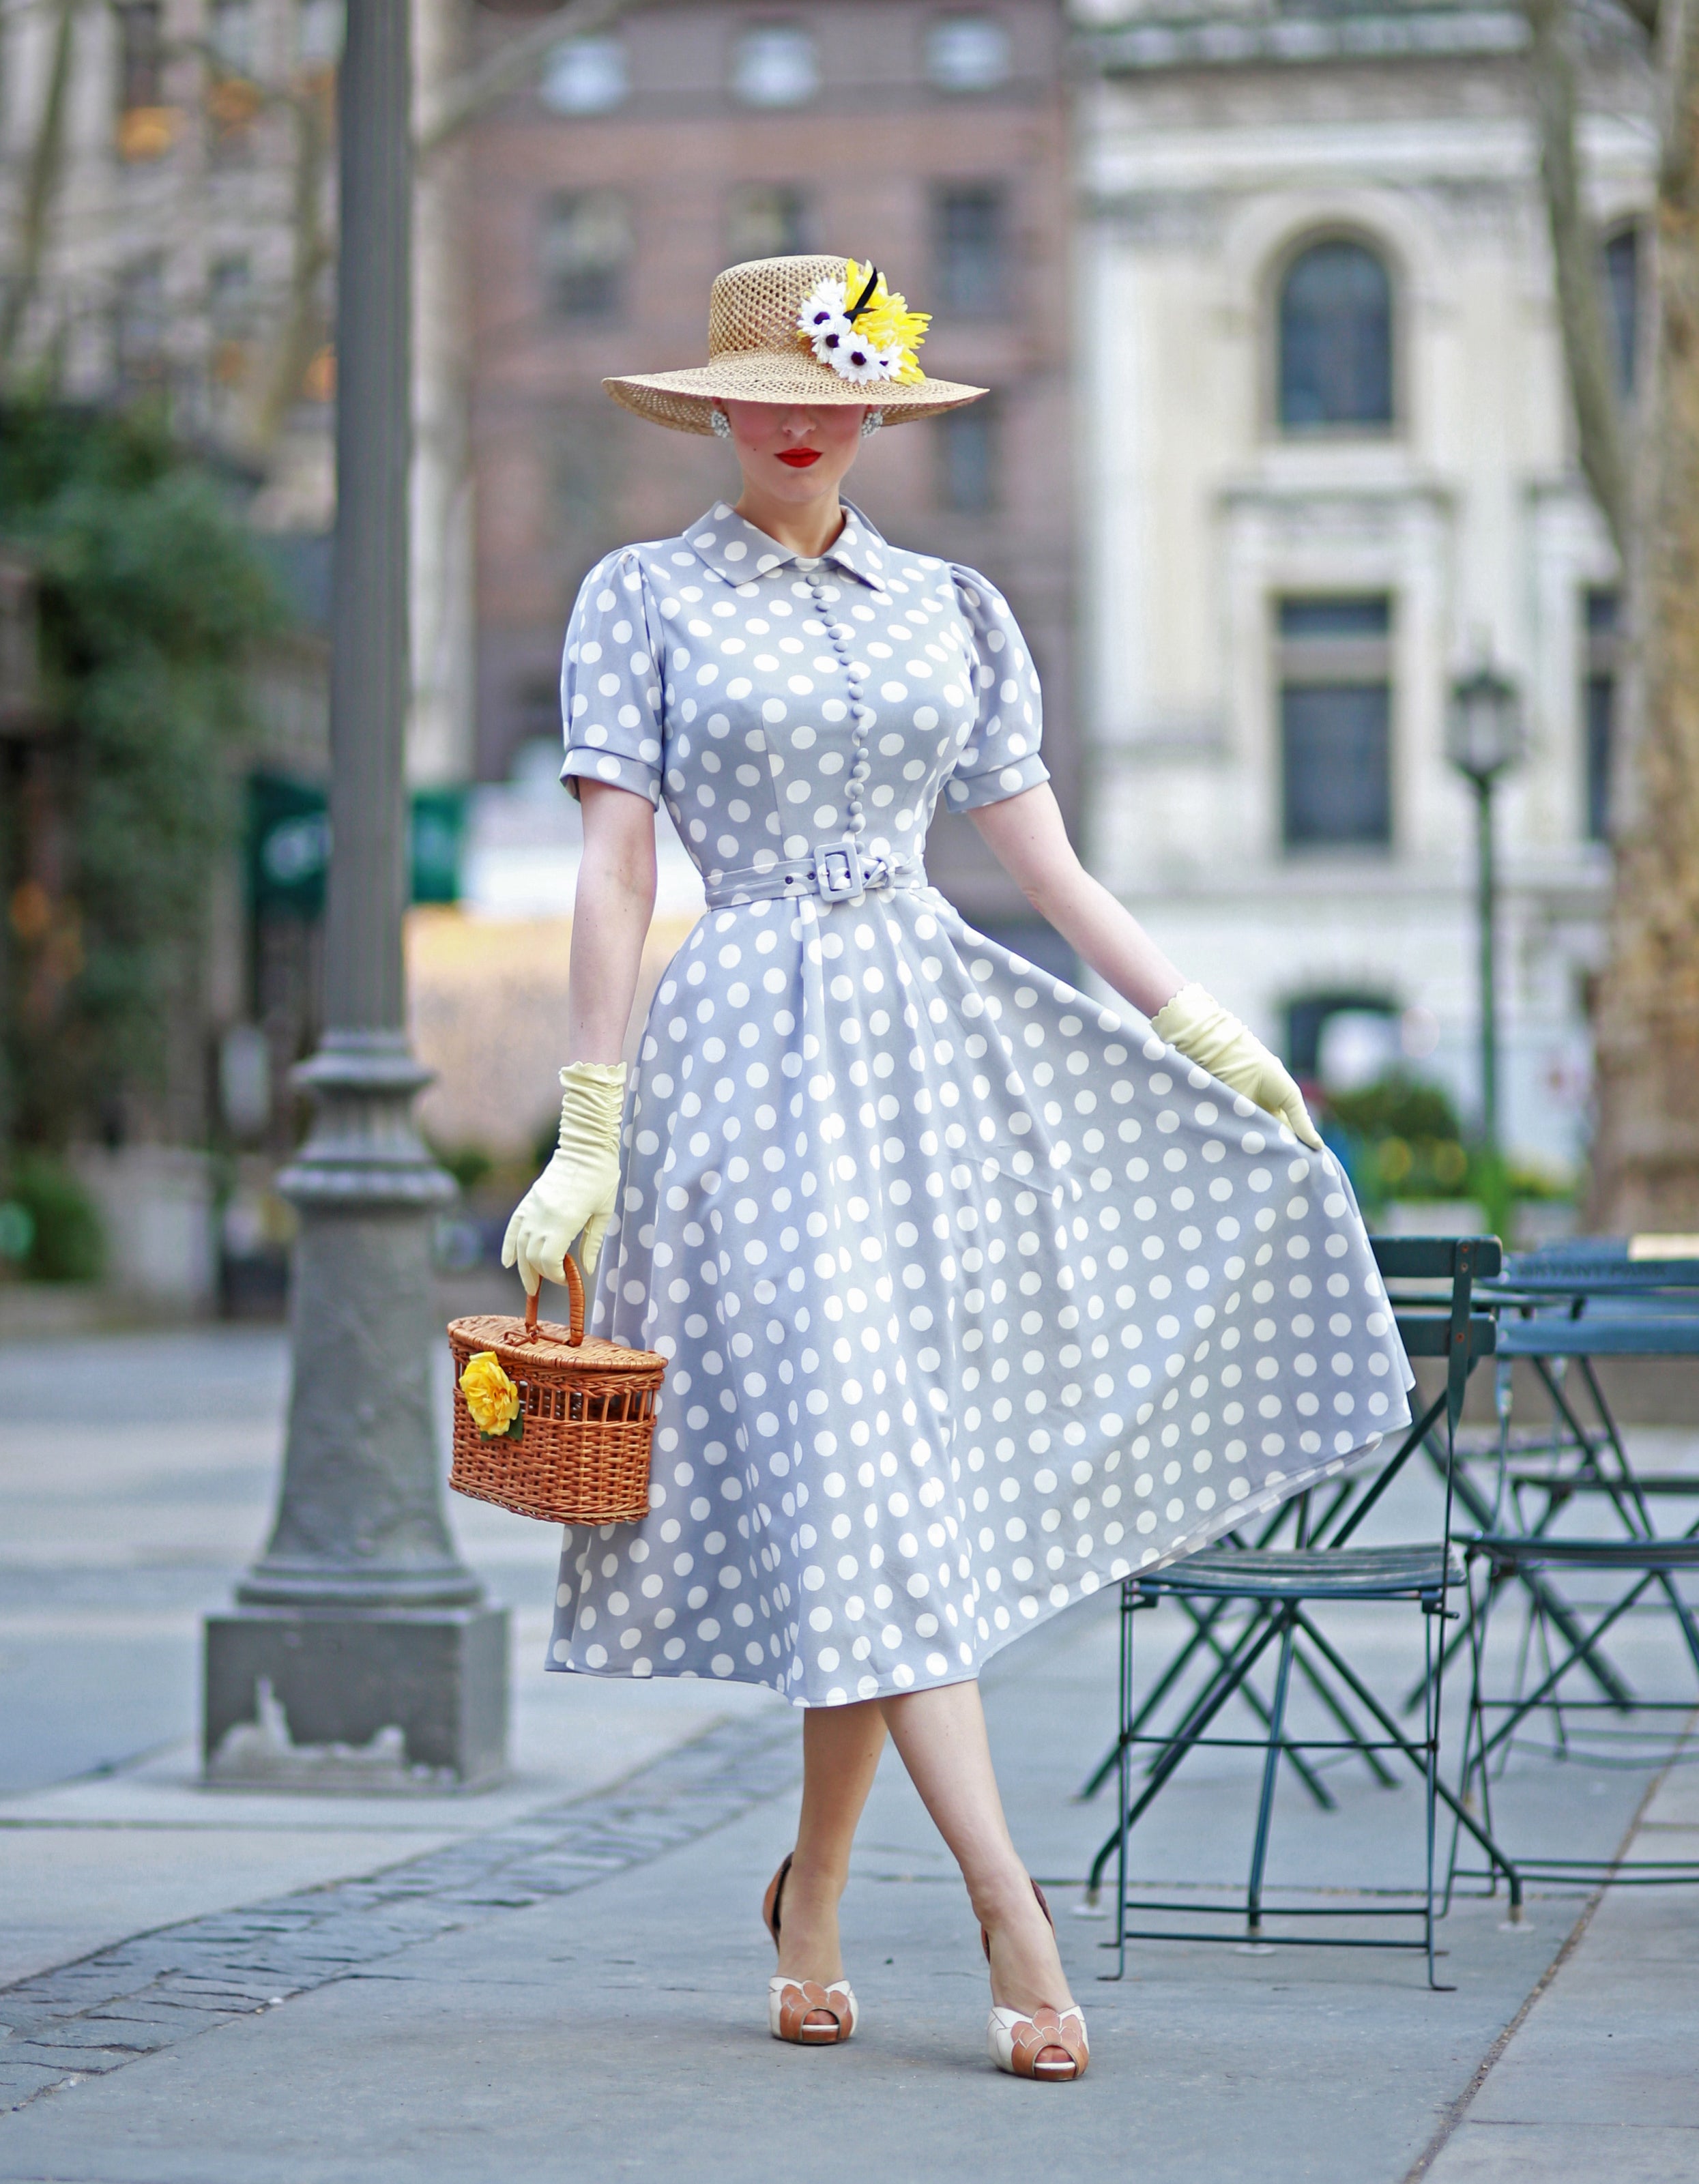 vintage 50s outfit